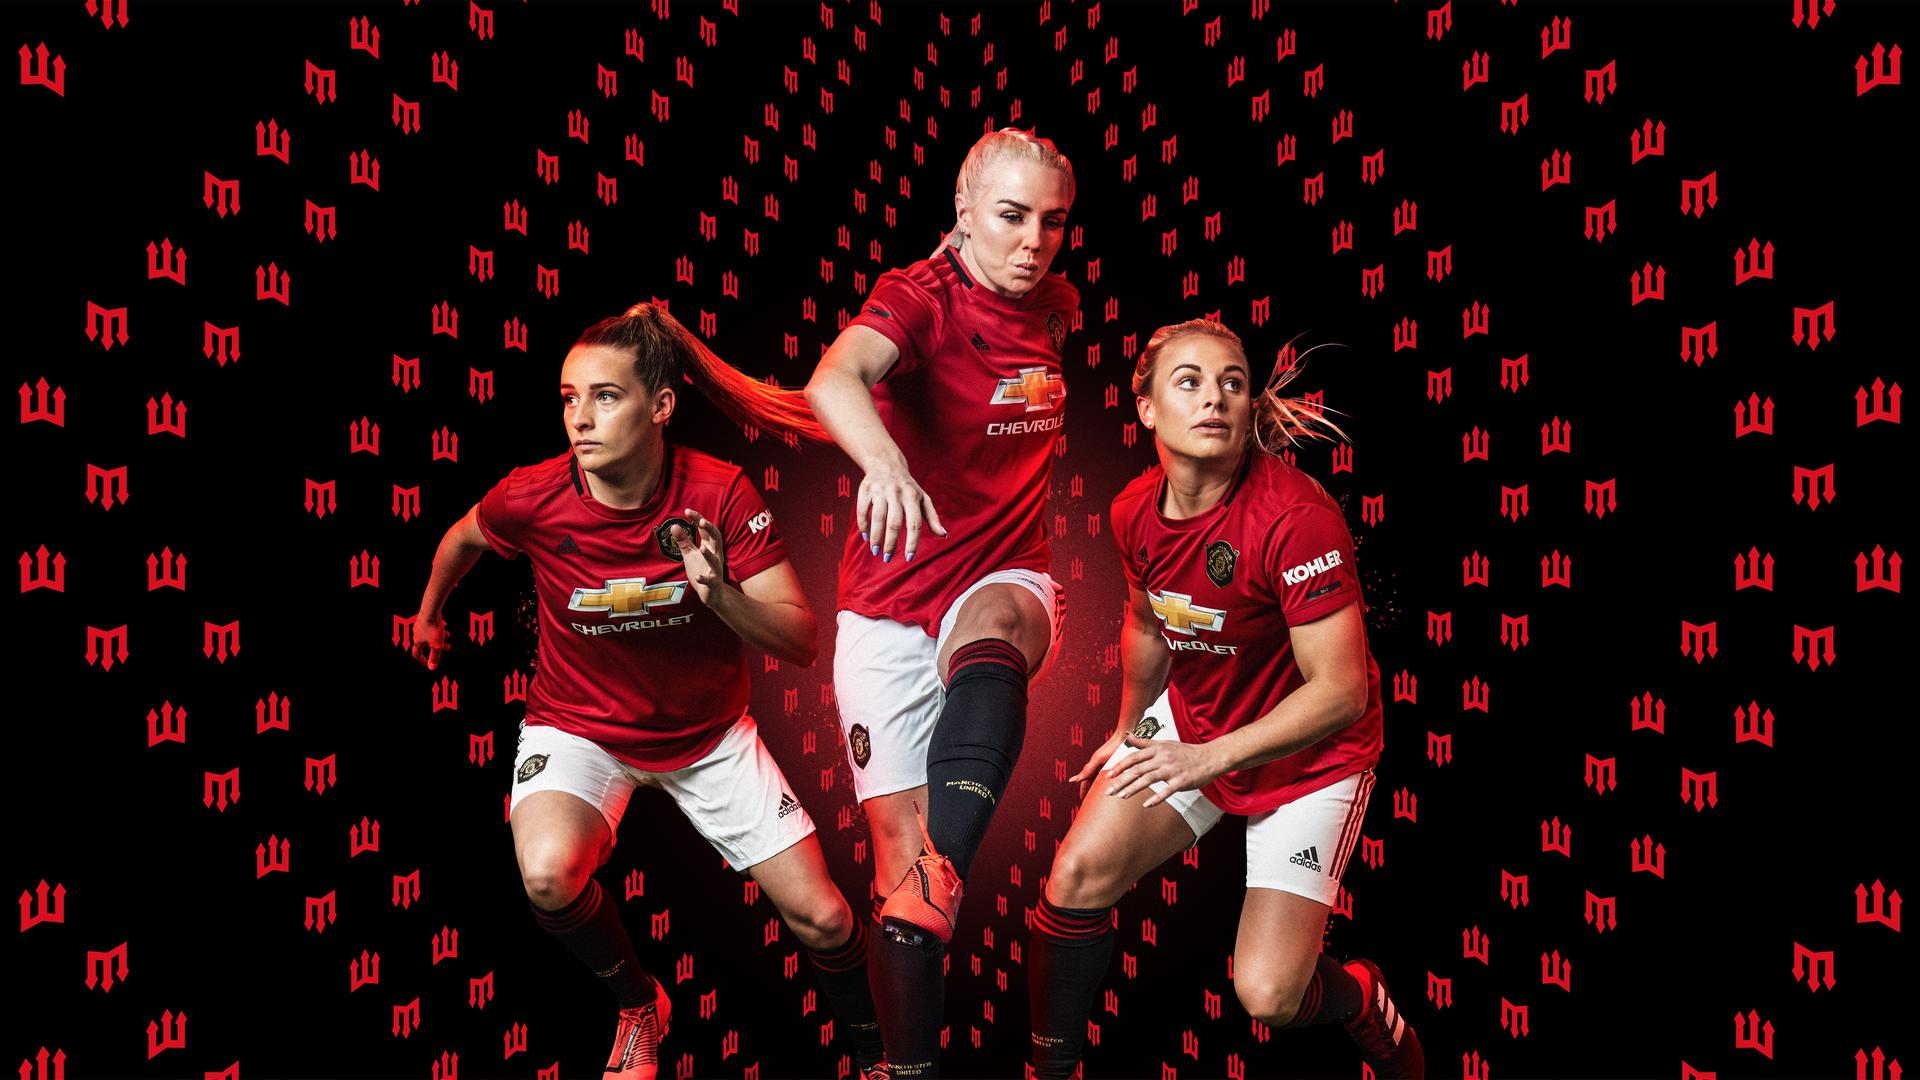 Manchester United Players Wallpaper 201920